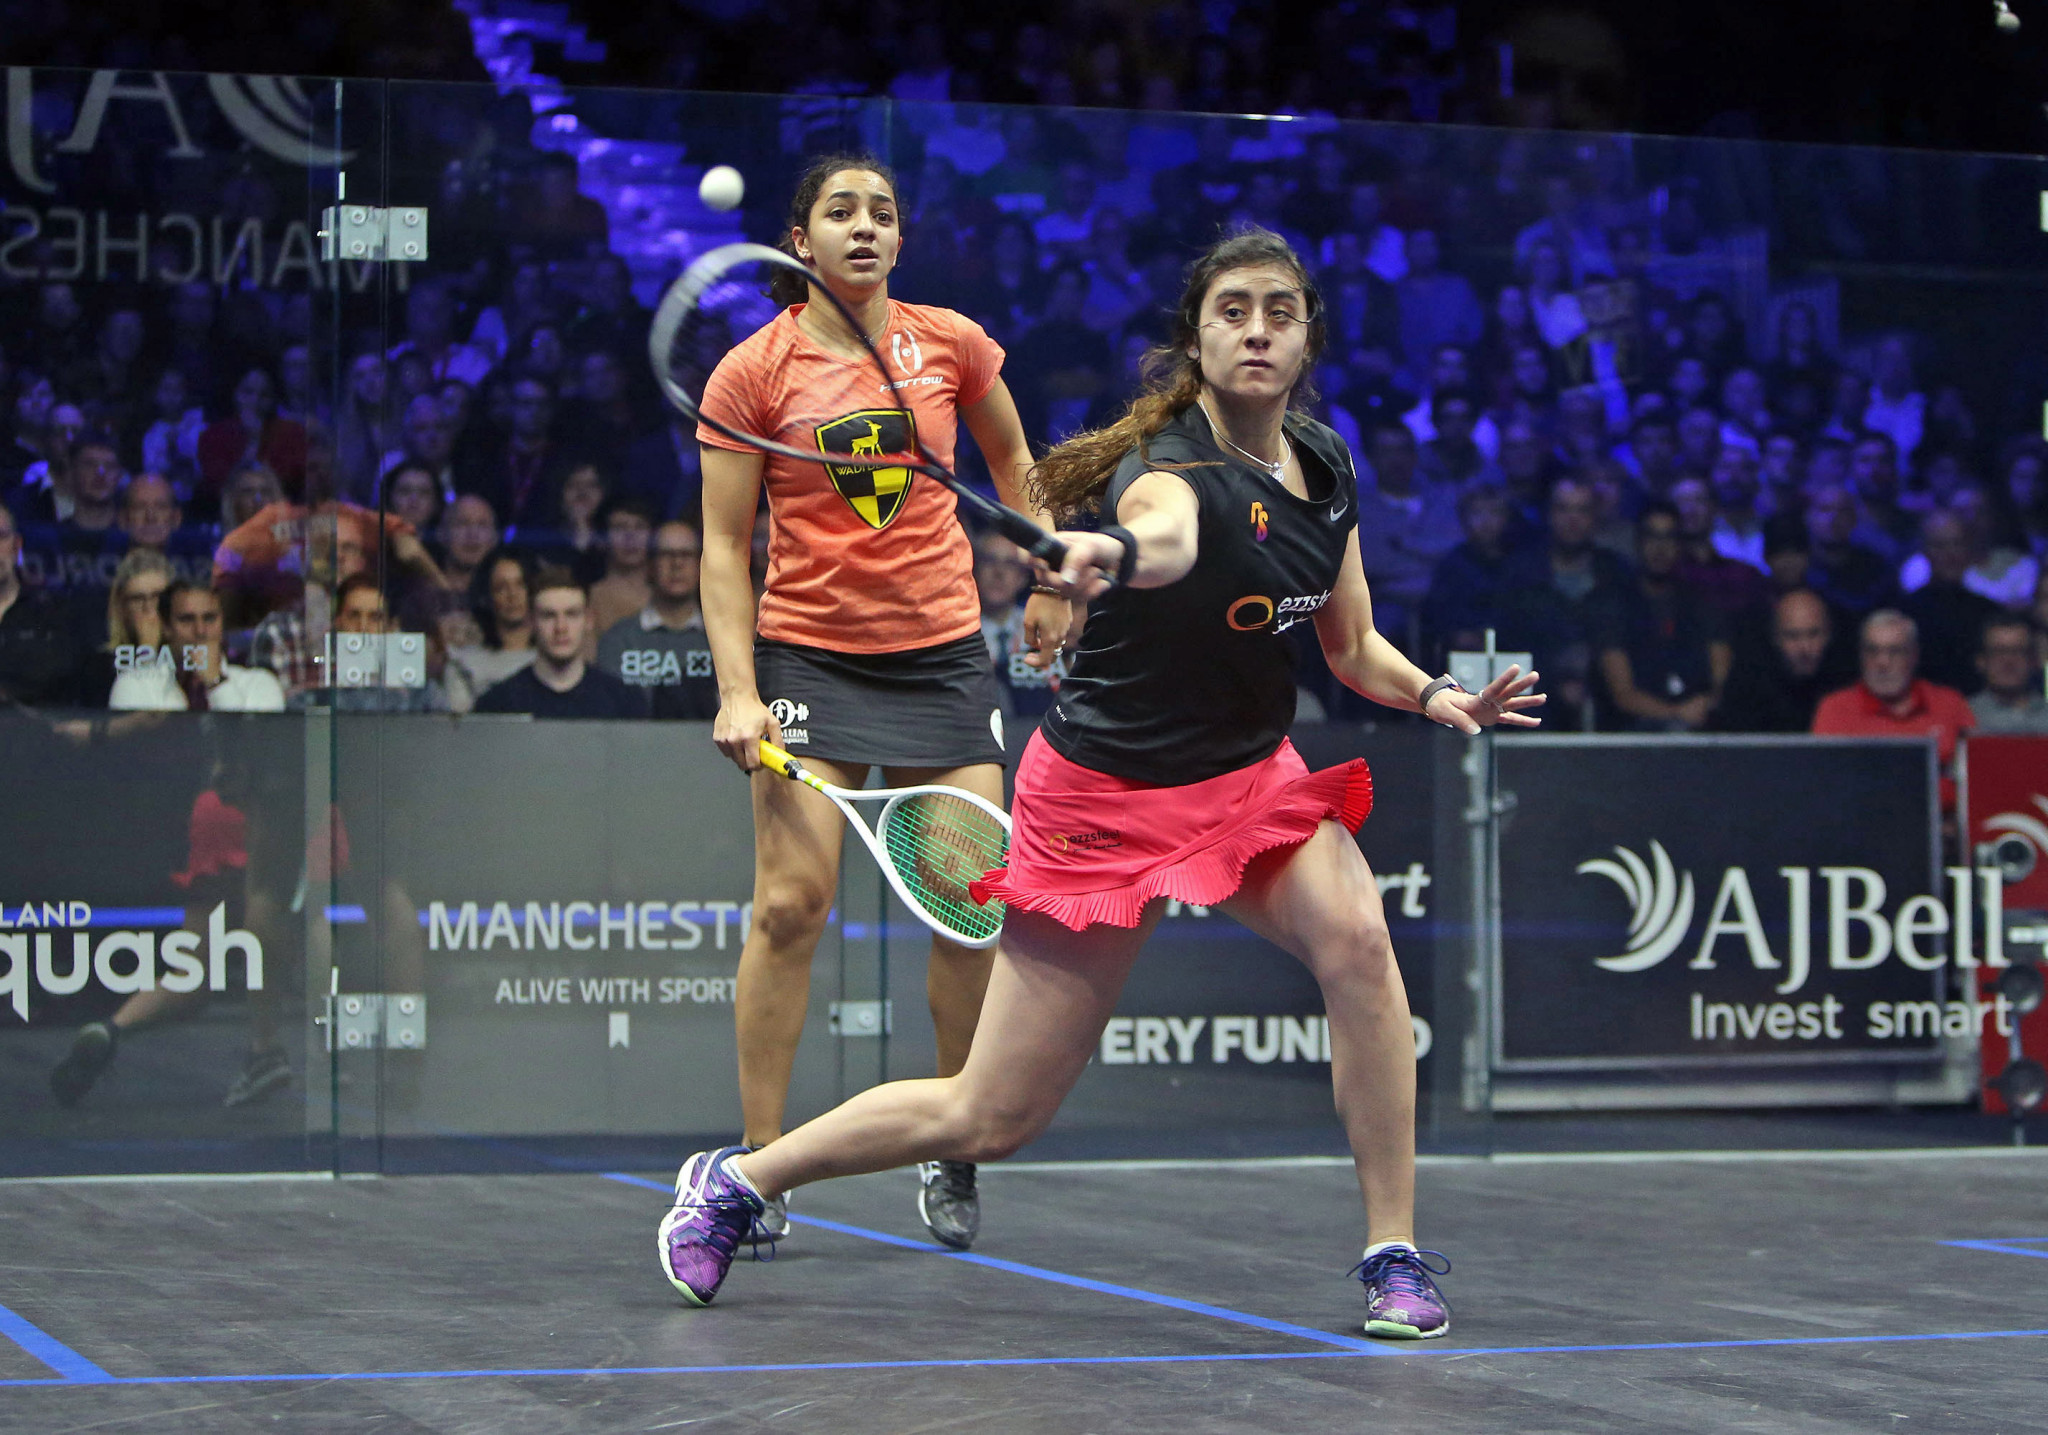 PSA to introduce first $1 million squash prize as gender gap in pay narrows